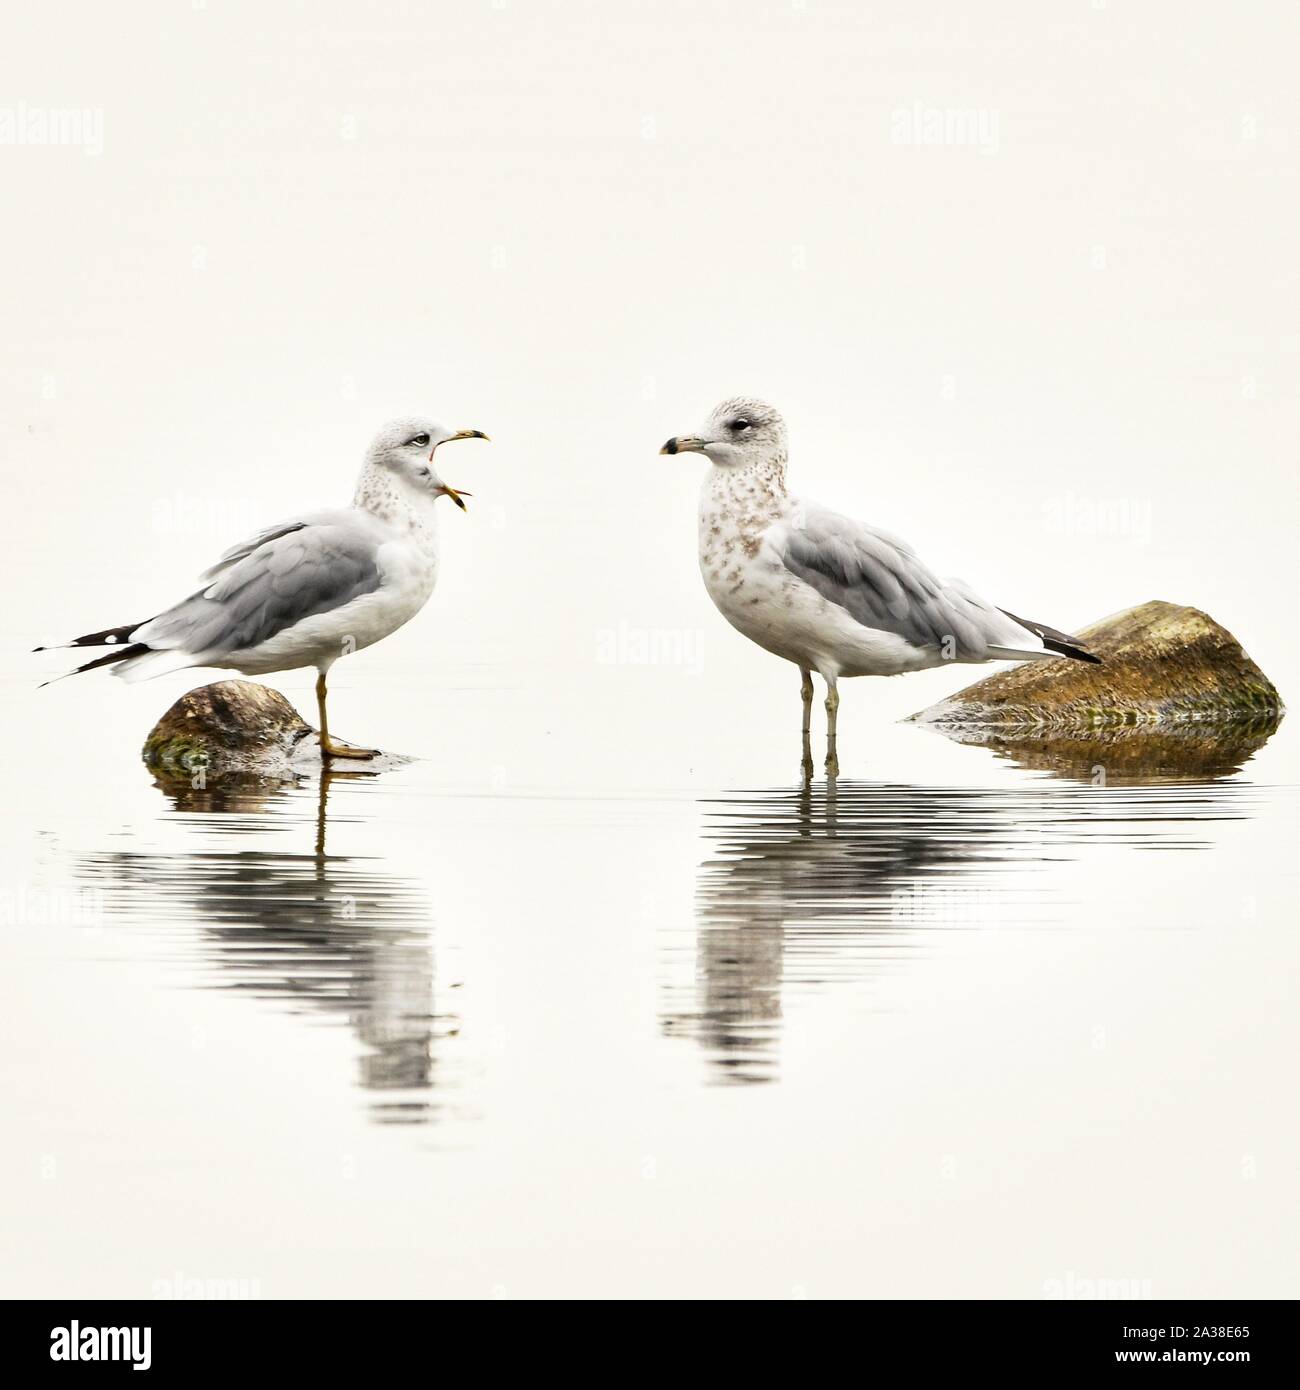 Two terns standing in shallow water looking at each other, Colorado, United States Stock Photo